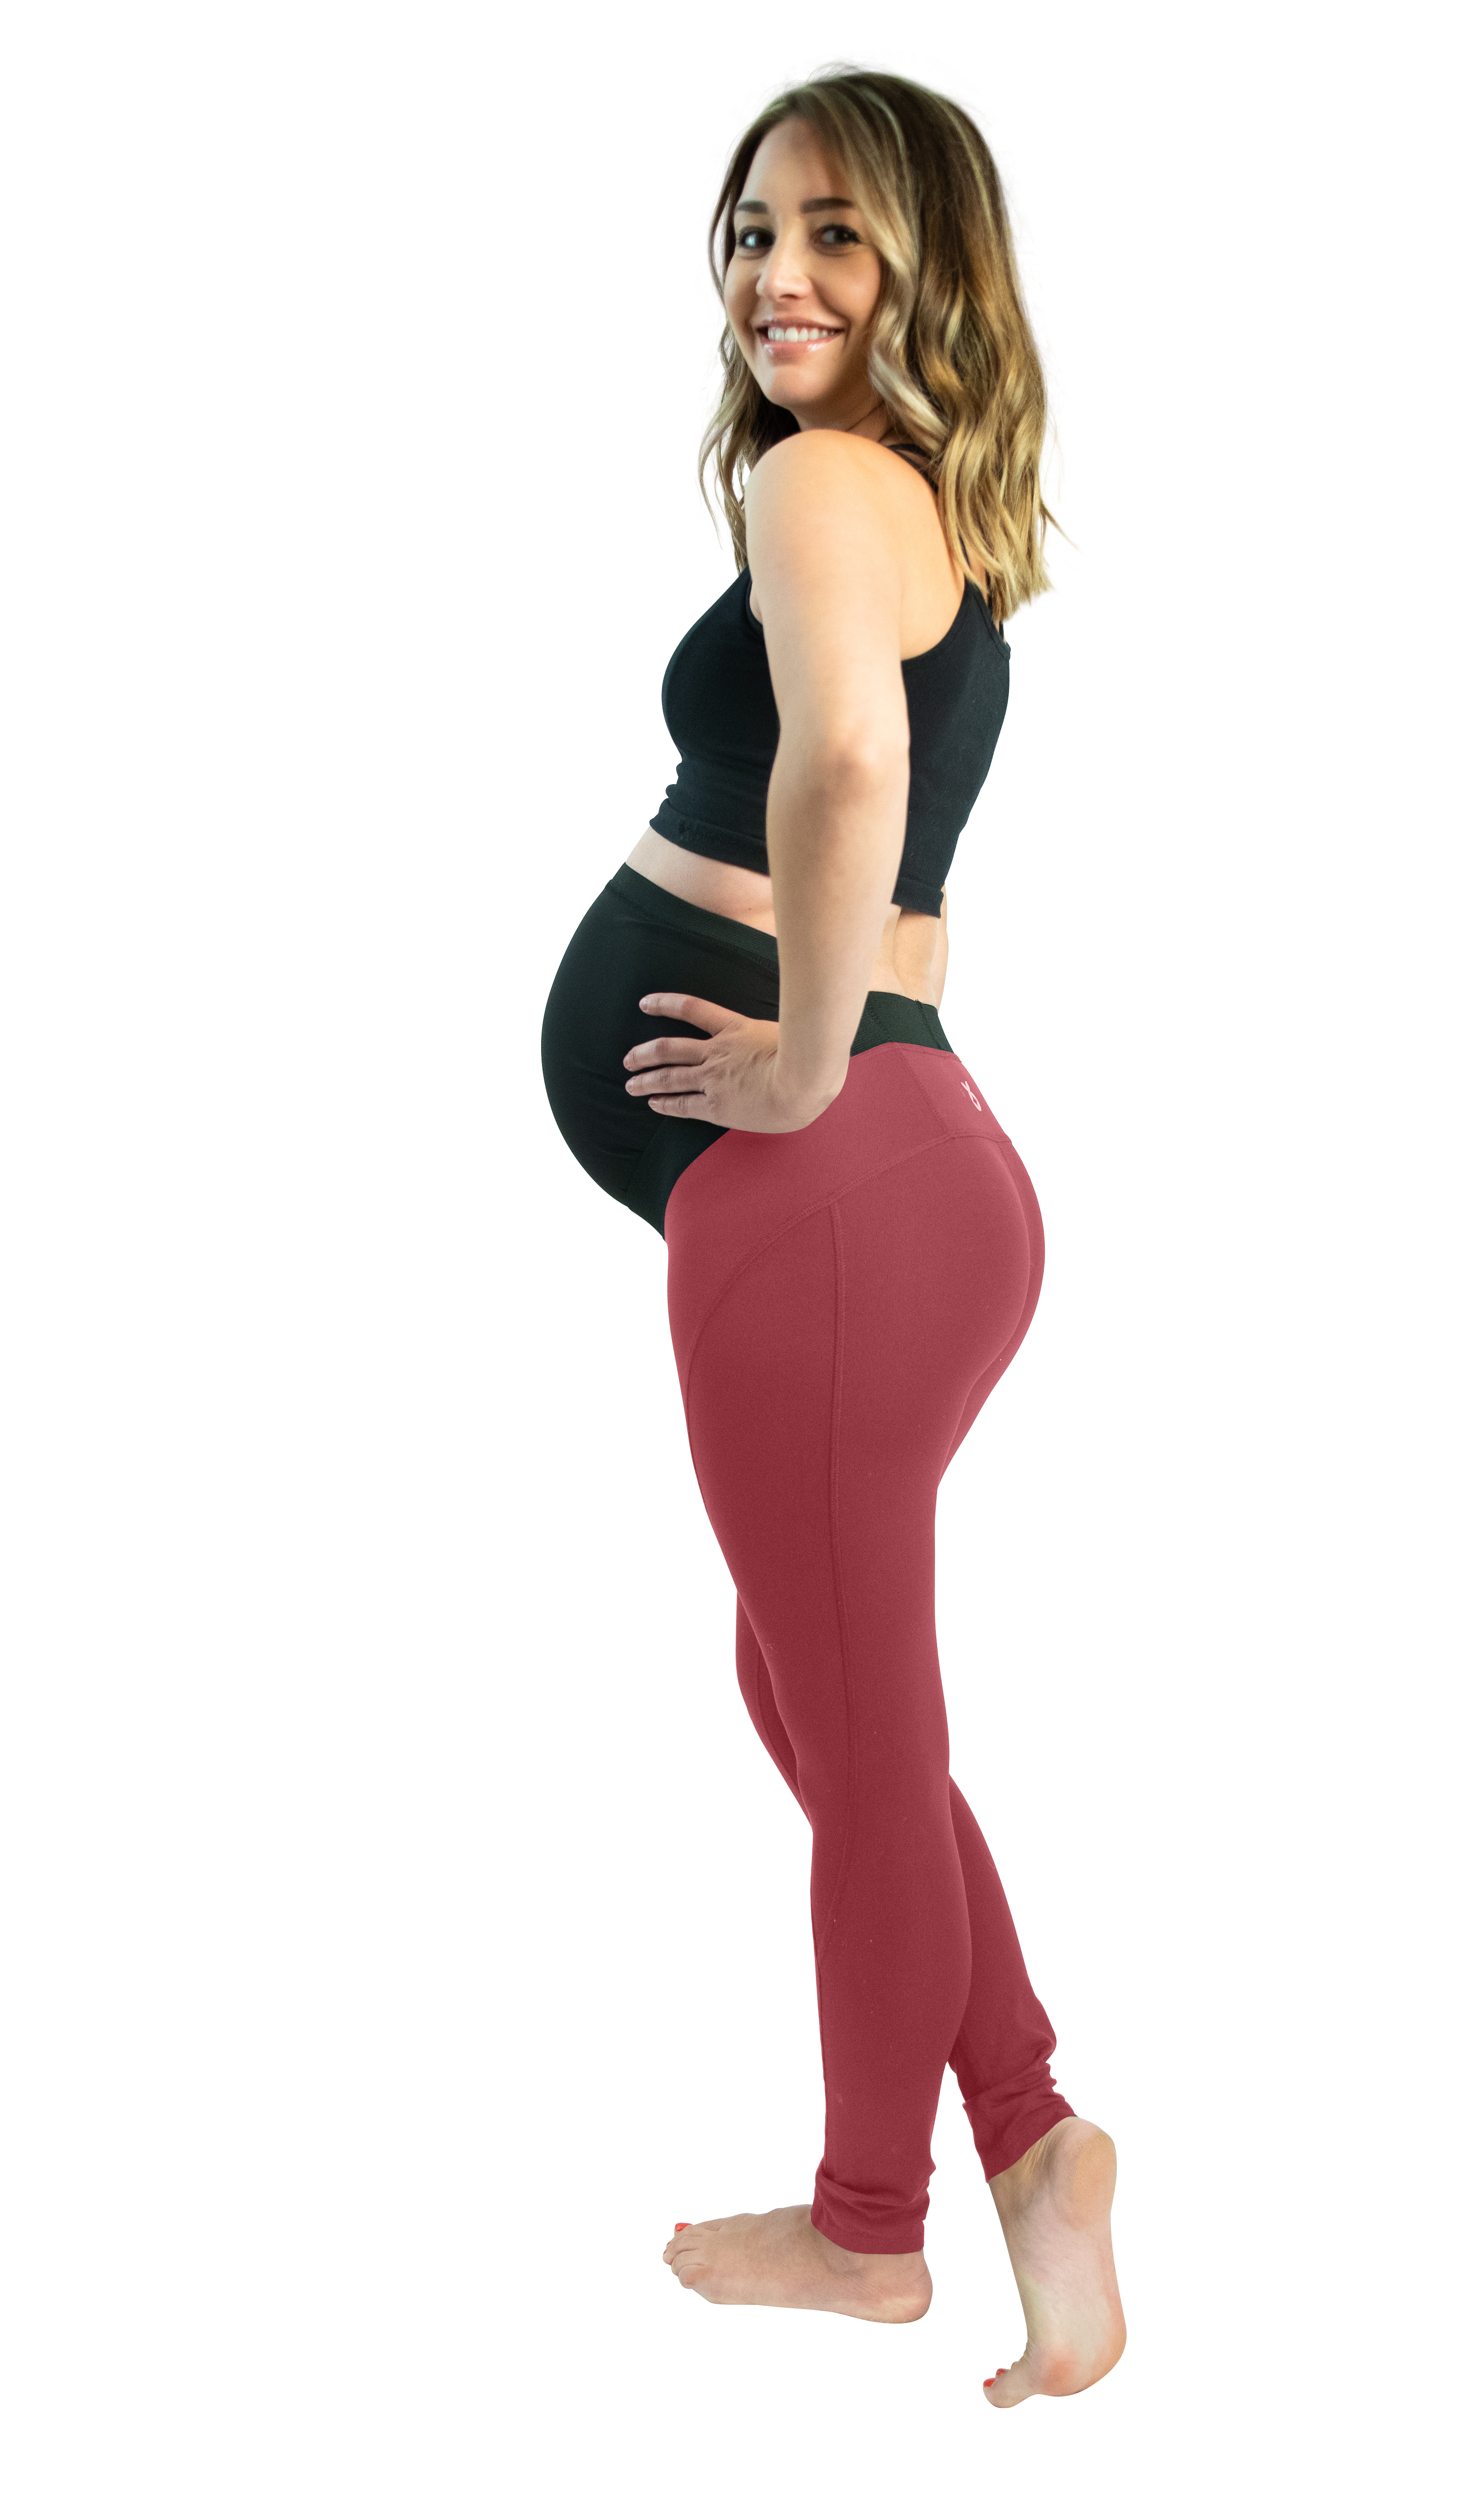 Mumberry® Dark Red Maternity Leggings with Over Belly Pregnancy Support - Mumberry